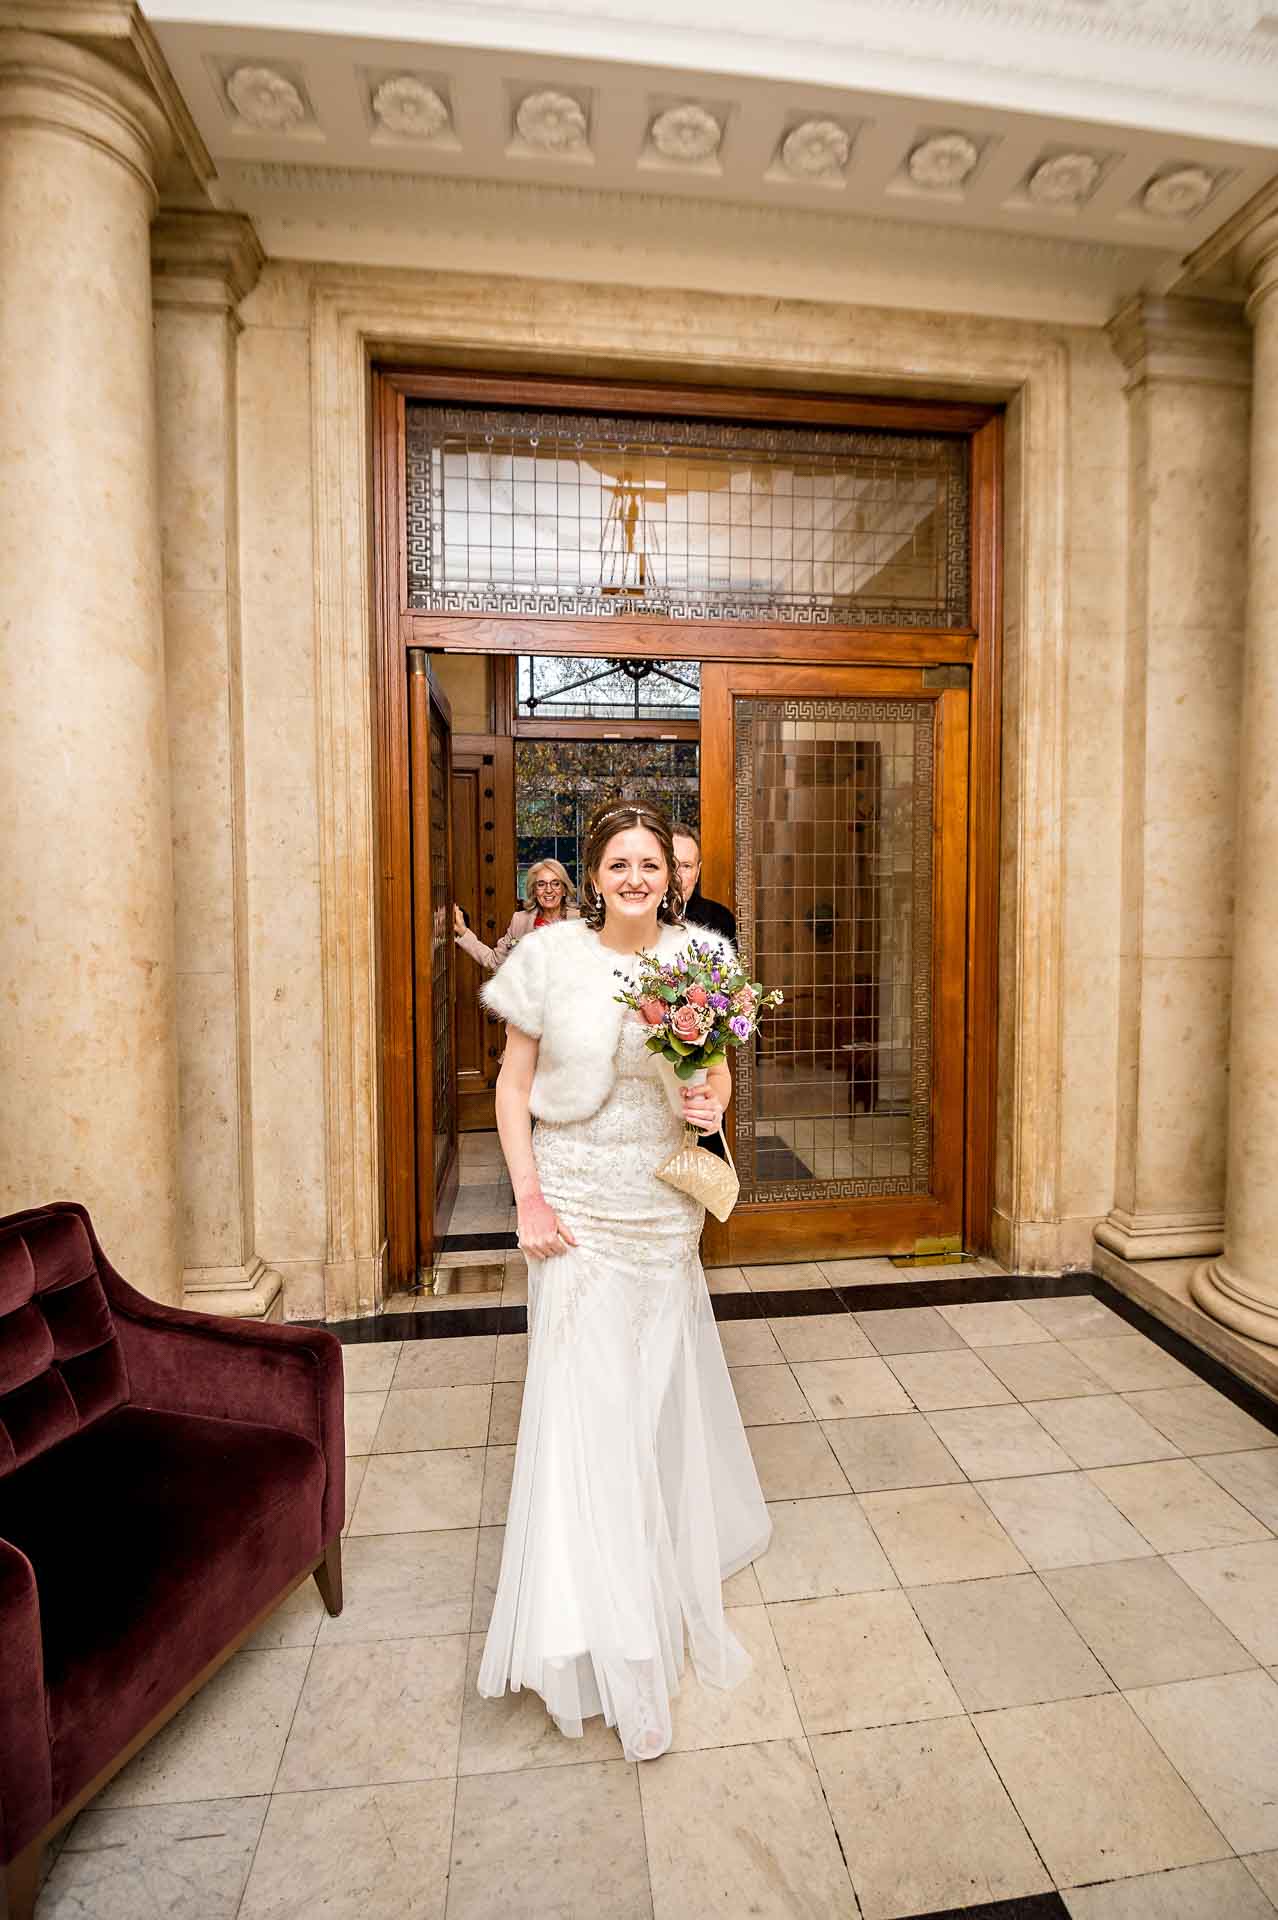 Bride walking through entrance hall of ornate Old Marylebone Town Hall register office in London